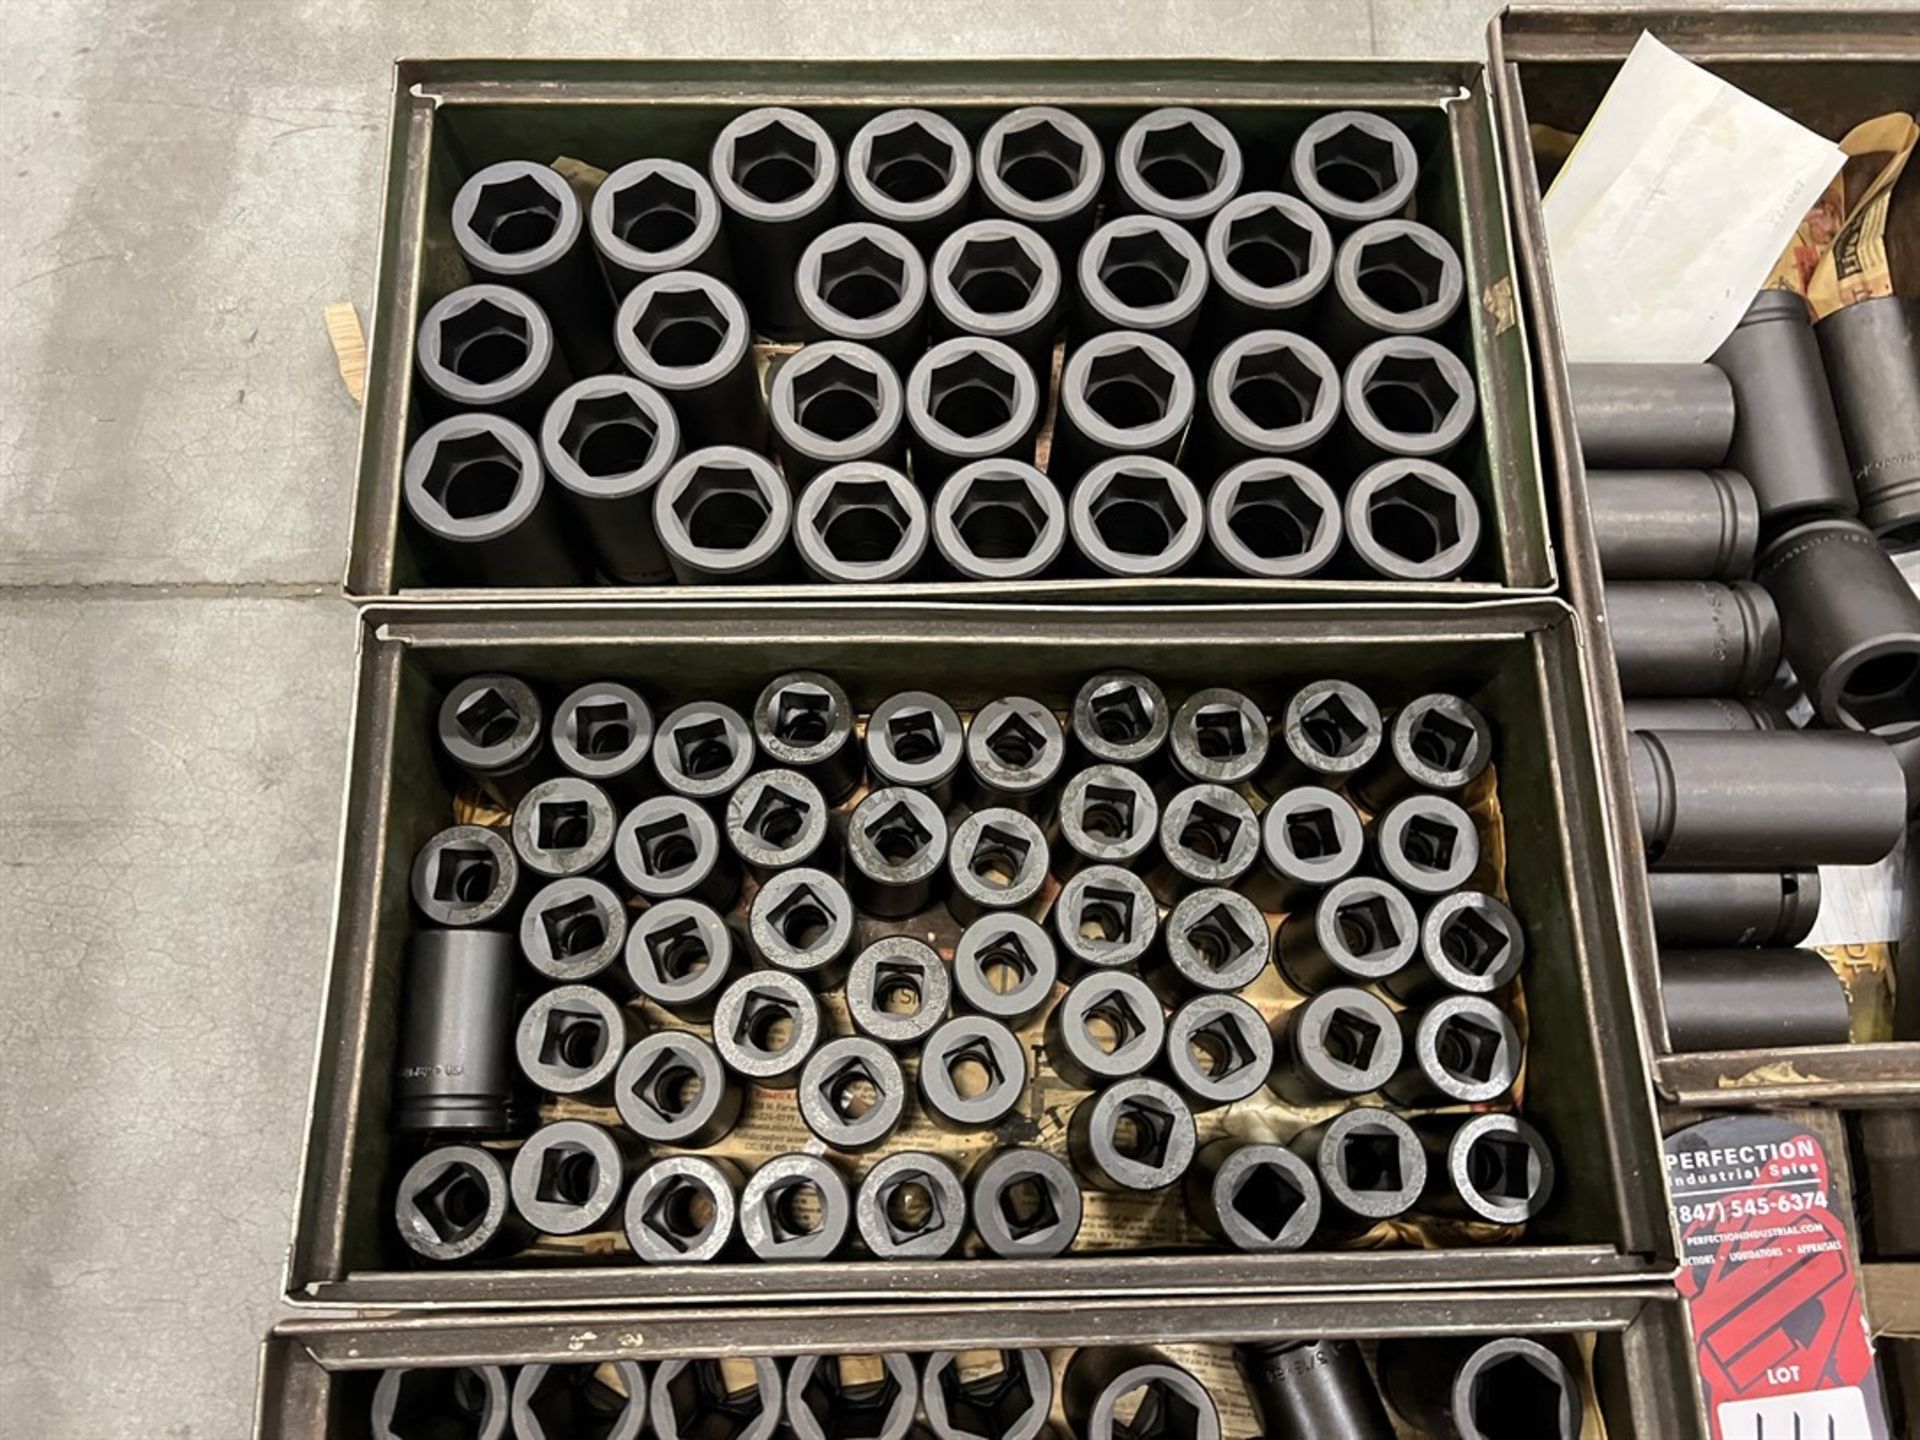 Pallet of 3/4" and 1" Drive Impact Sockets up to 35mm and 1-3/16" - Image 4 of 6